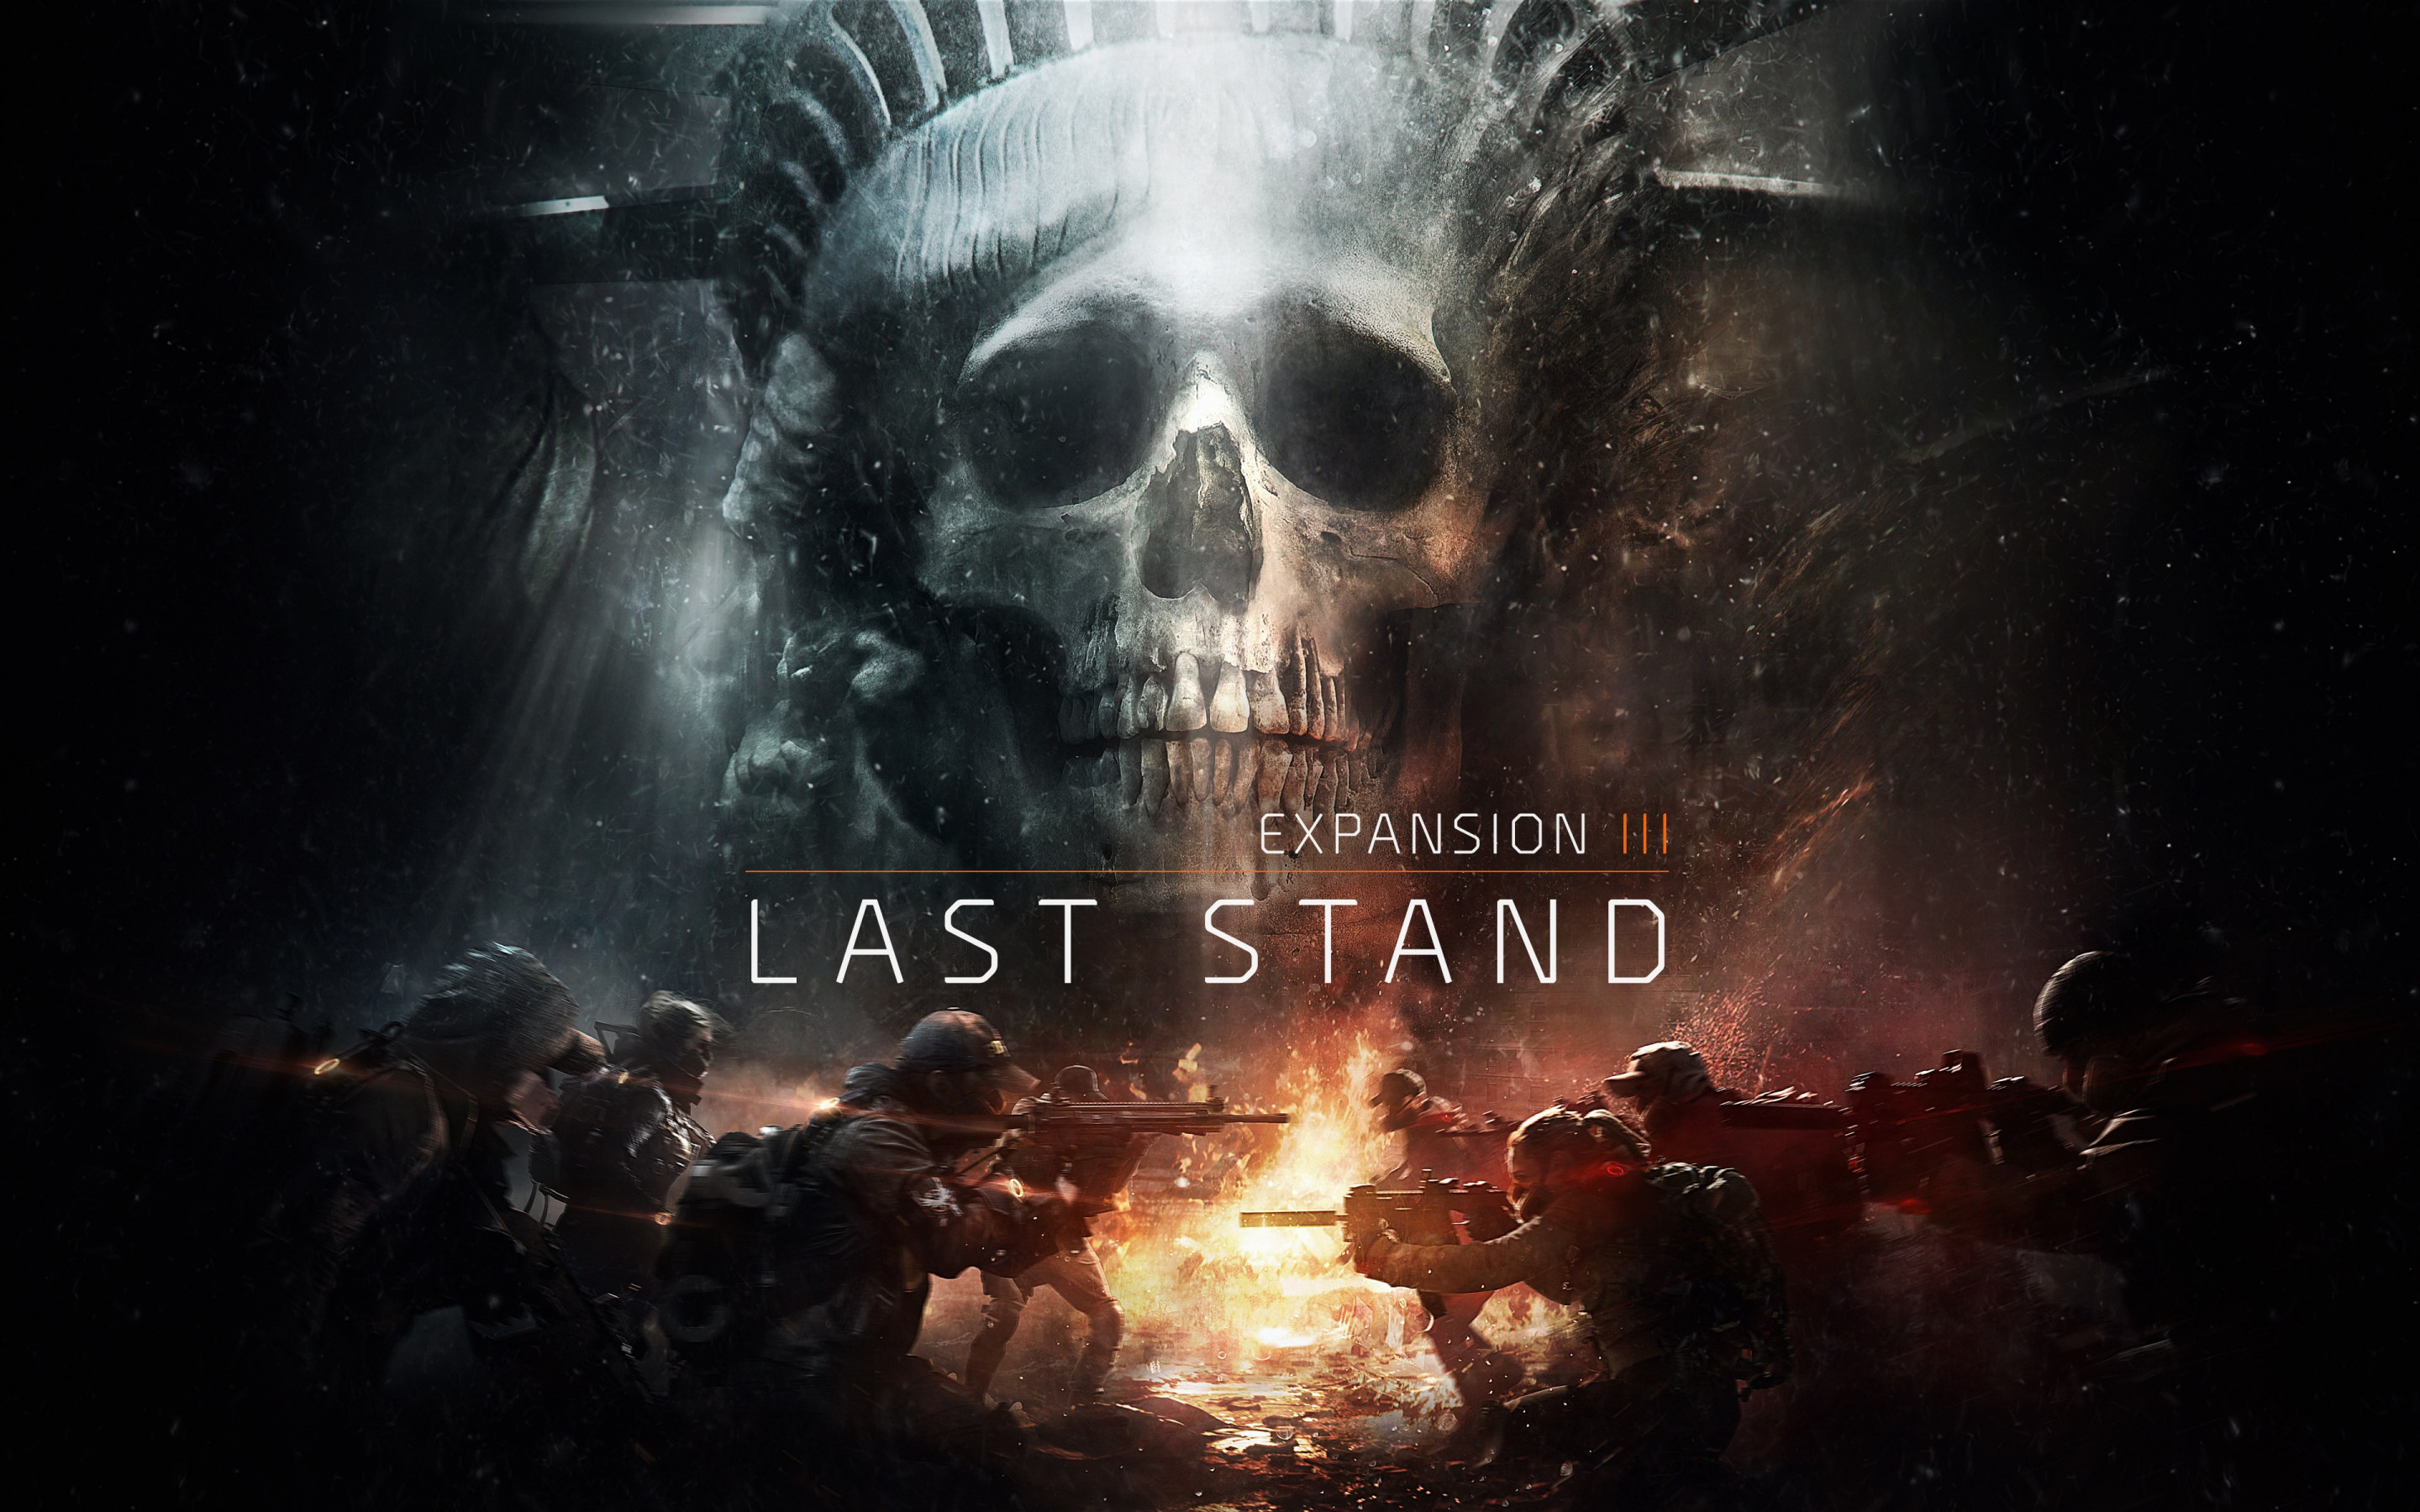 The Division Last Stand Expansion 3 wallpaper 2880x1800